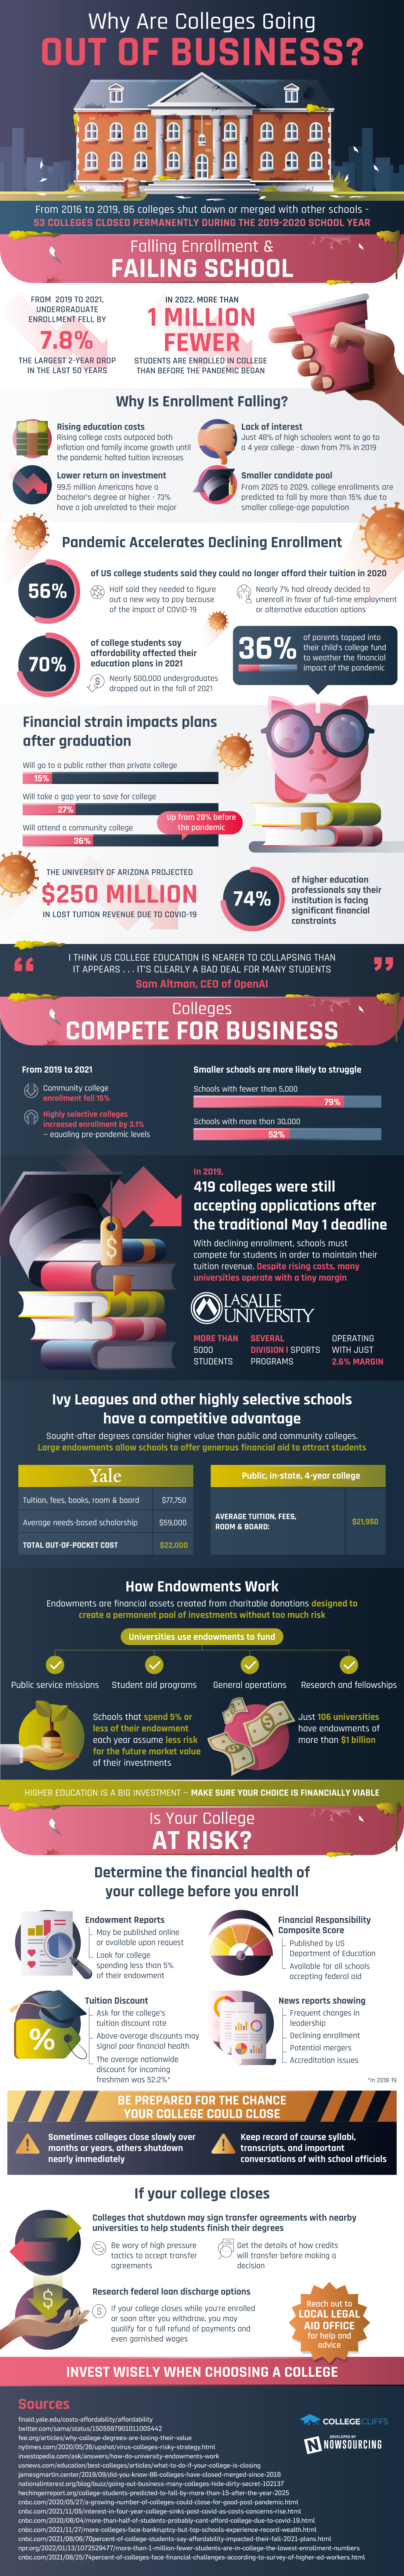 The Fight to Keep College Classrooms Filled #Infographic